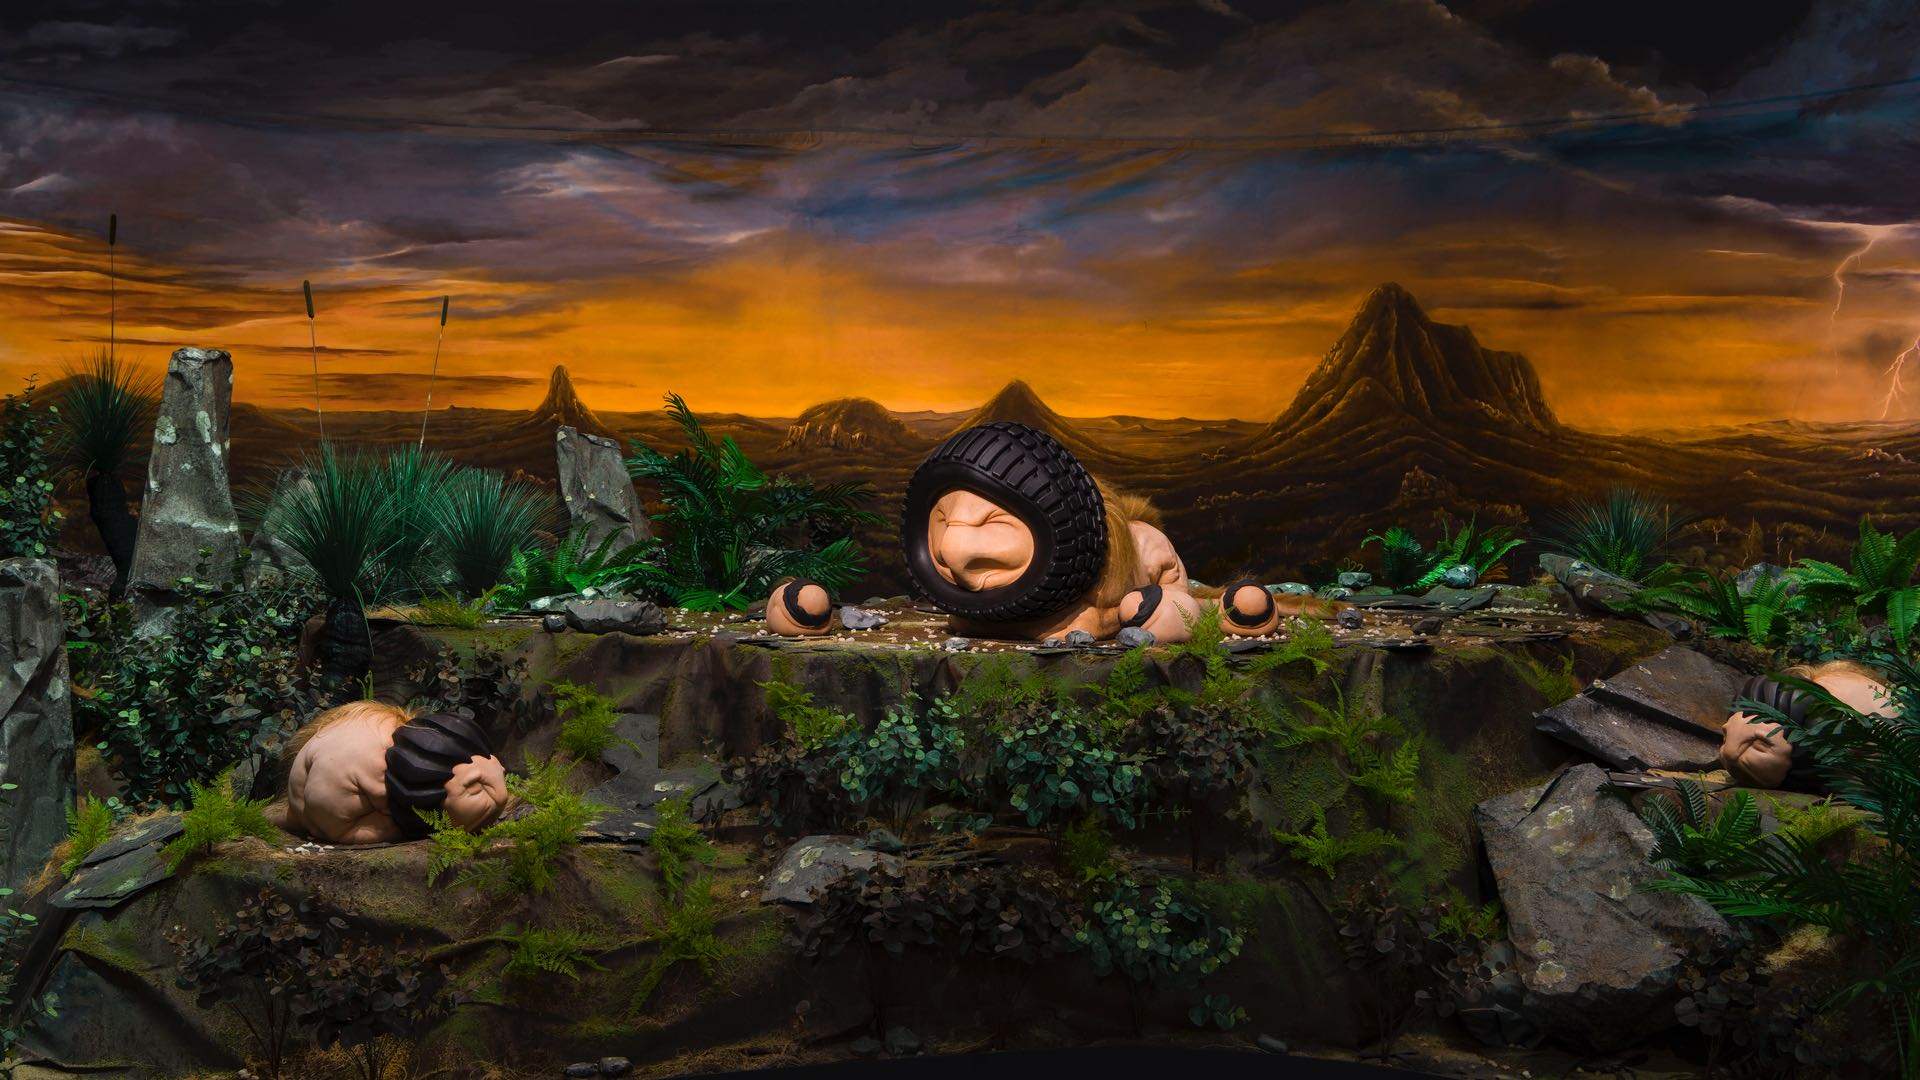 A Look Inside GOMA's Weird and Wonderful 'Patricia Piccinini: Curious Affection' Exhibition